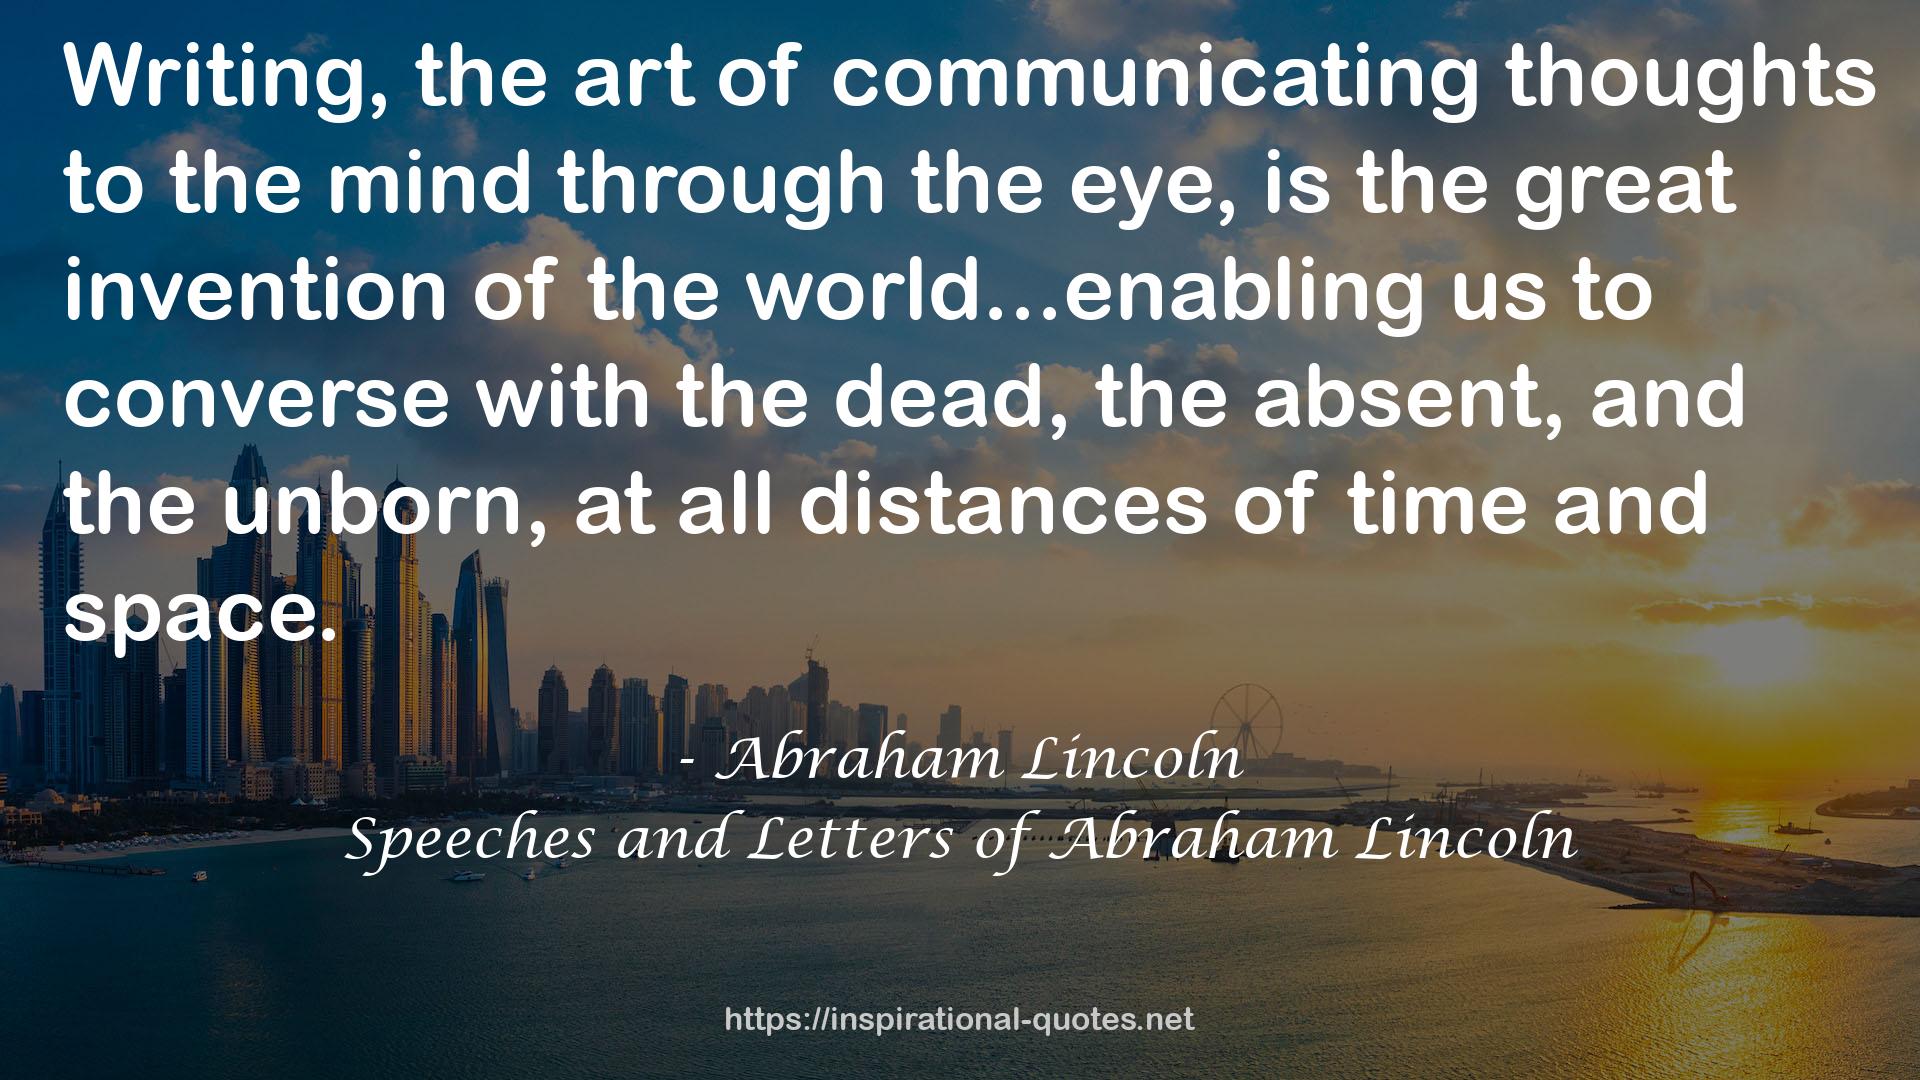 Speeches and Letters of Abraham Lincoln QUOTES